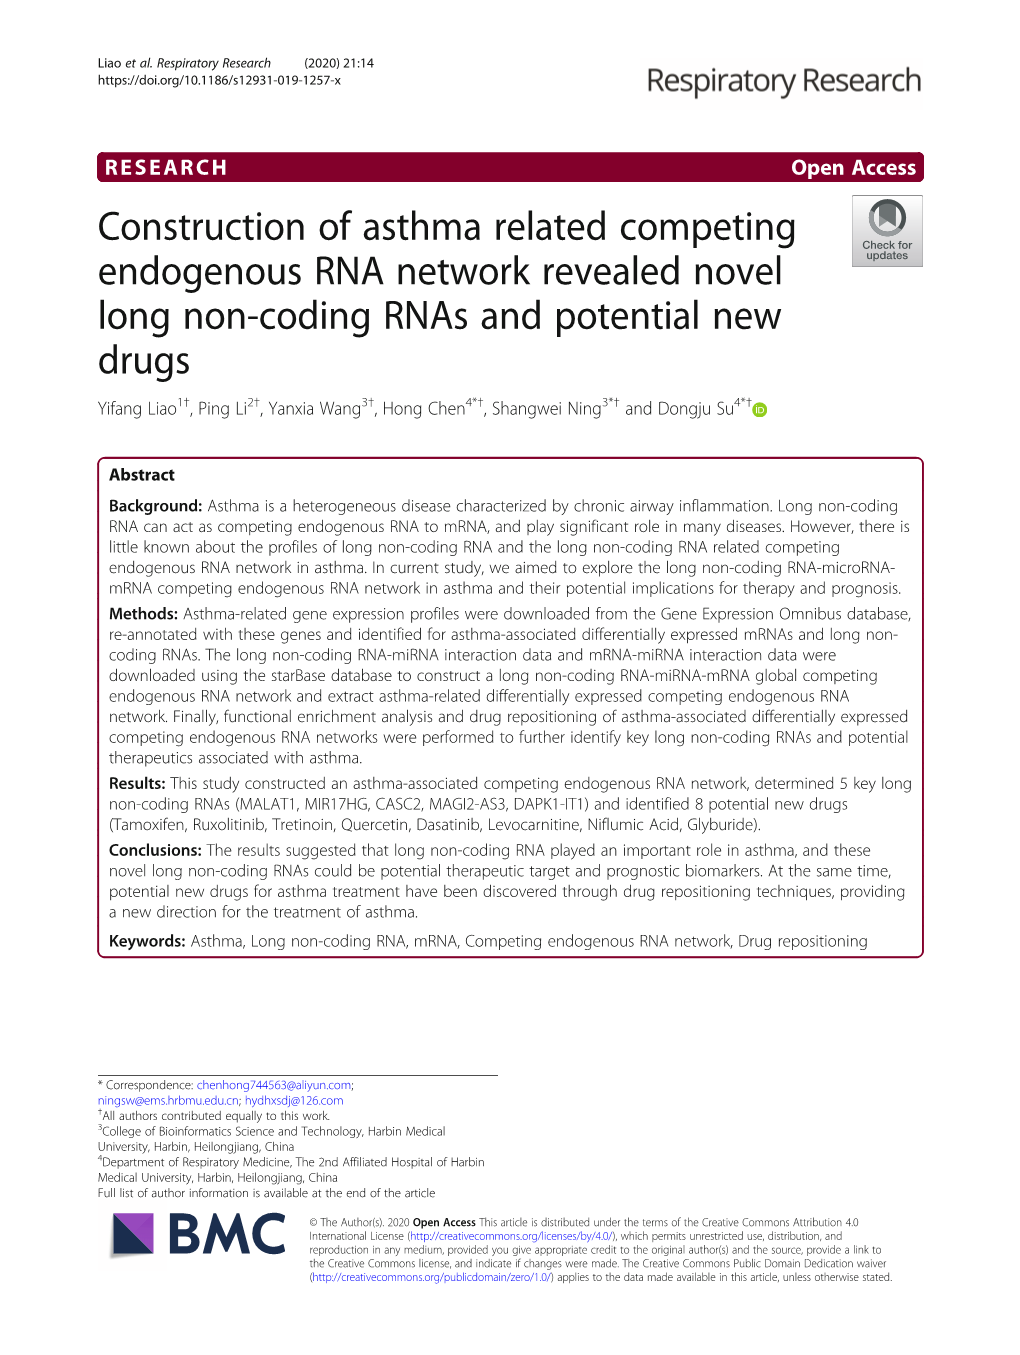 Construction of Asthma Related Competing Endogenous RNA Network Revealed Novel Long Non-Coding Rnas and Potential New Drugs